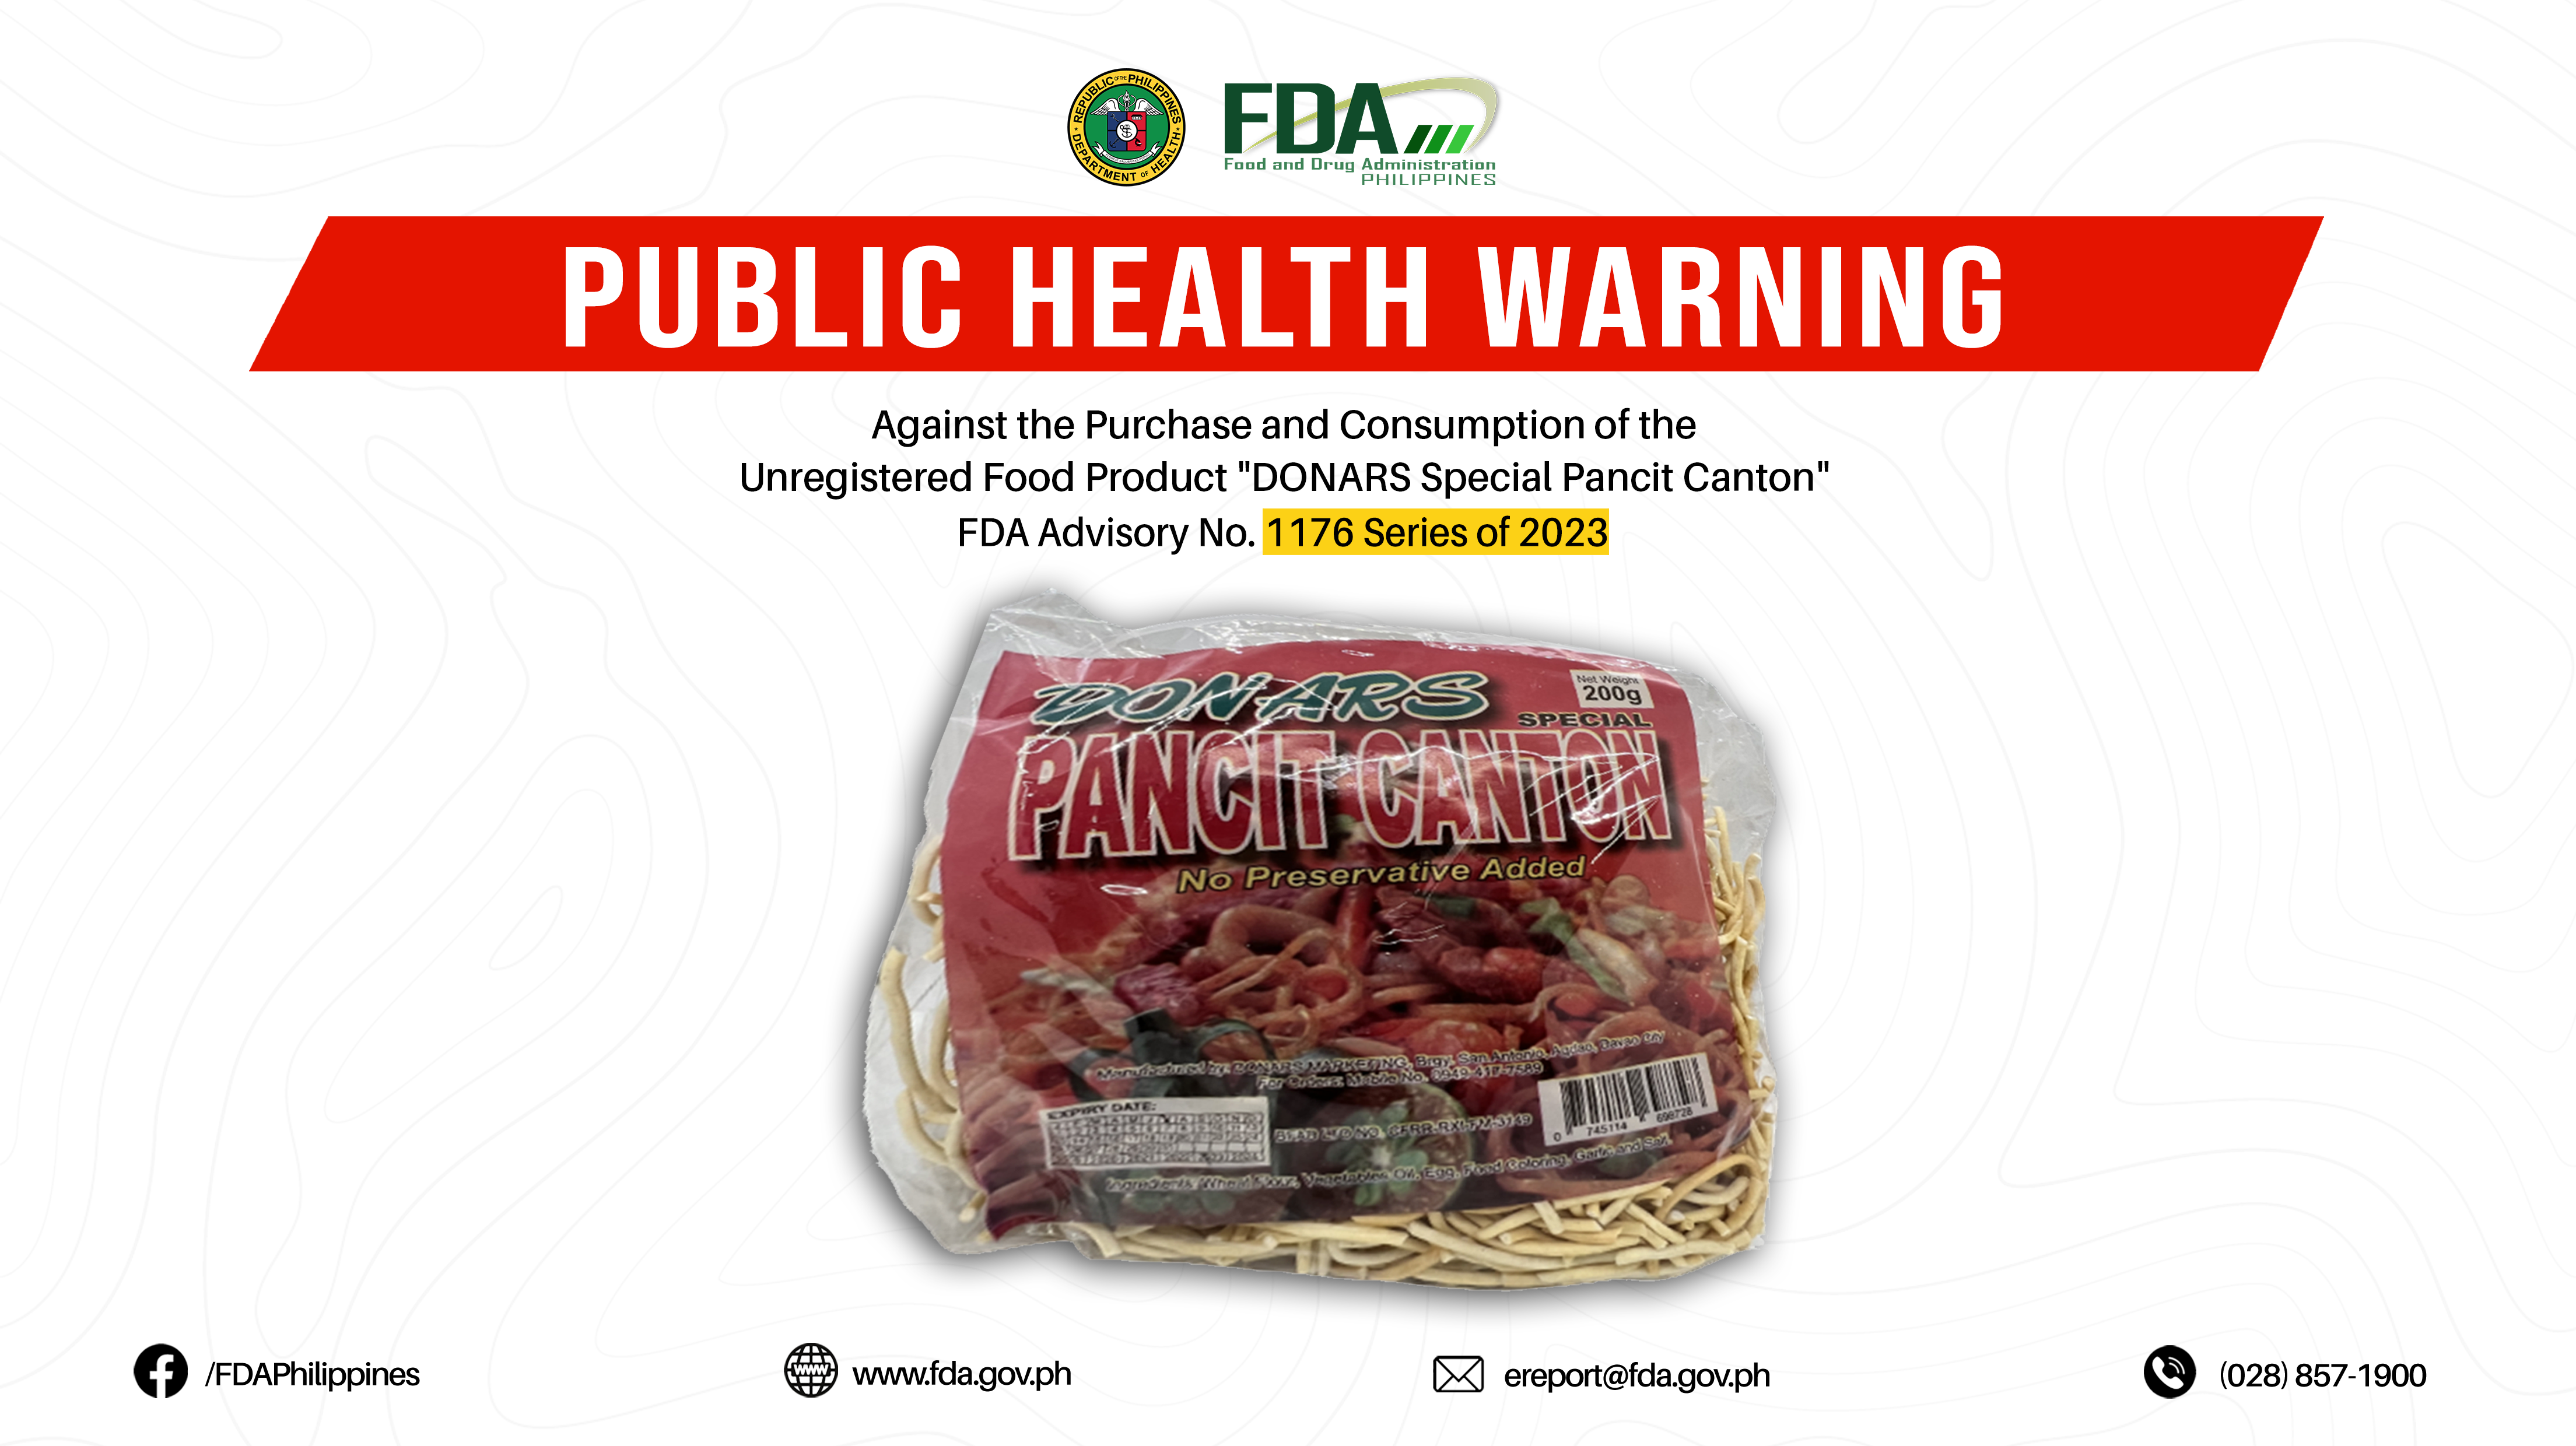 FDA Advisory No.2023-1176 || Public Health Warning Against the Purchase and Consumption of the Unregistered Food Product “DONARS Special Pancit Canton”